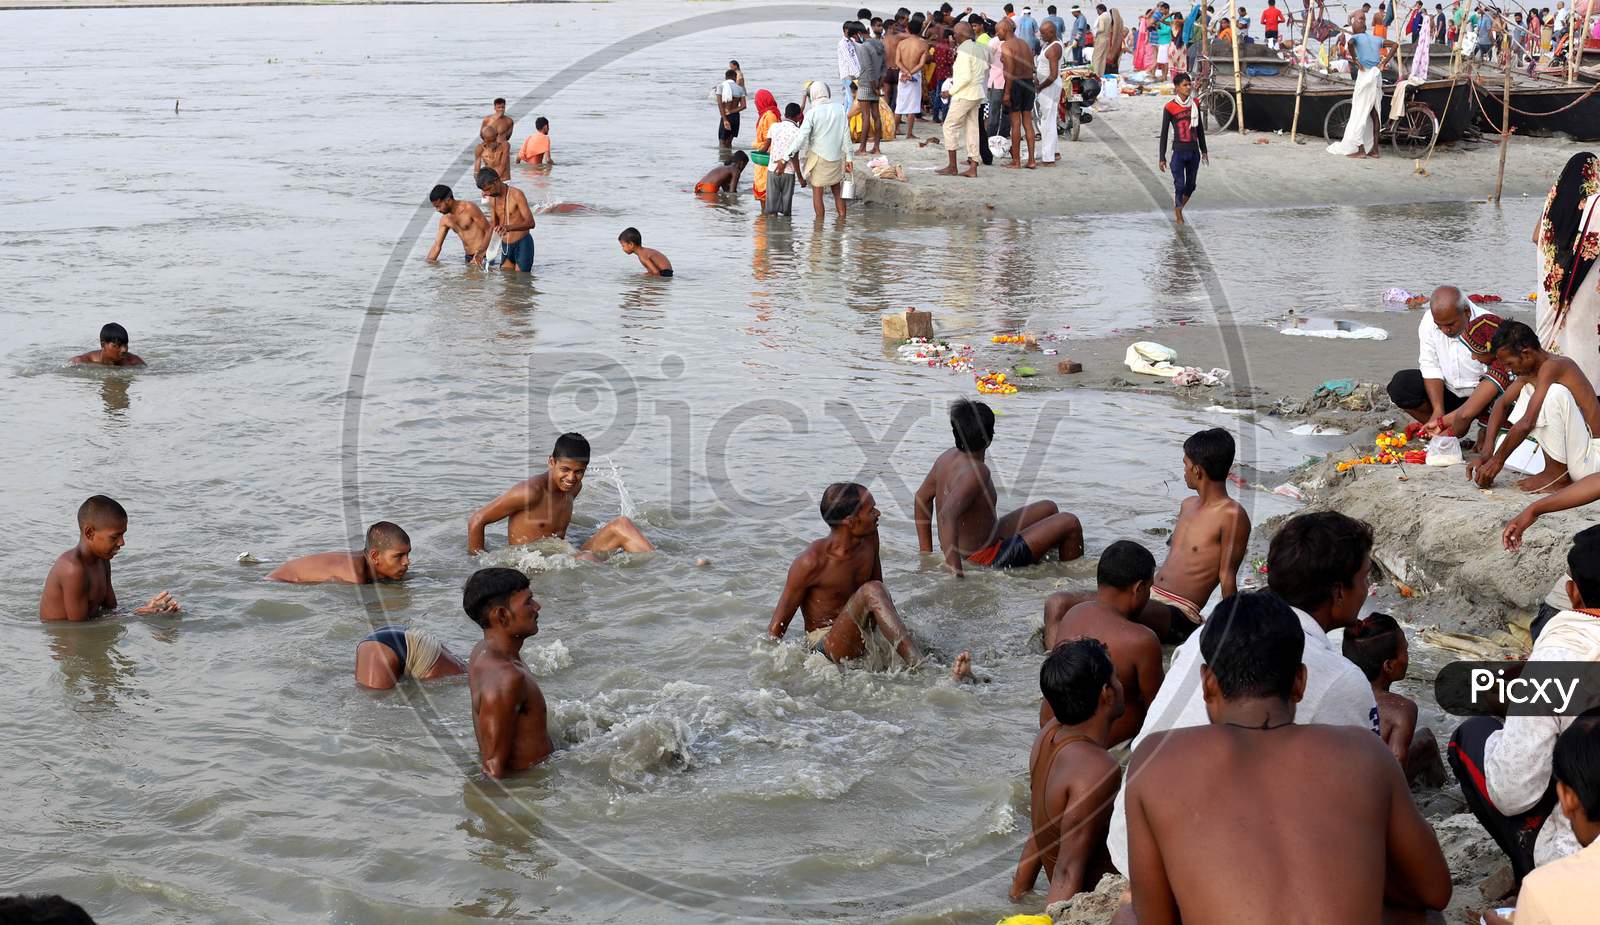 Hindu Devotees Takes Holy Dip In The Sangam, Confluence Of Three Rivers, The Ganga, The Yamuna And Mythical Saraswati After Lunar Eclipse Or Chandra Grahan In Prayagraj, June 6, 2020.